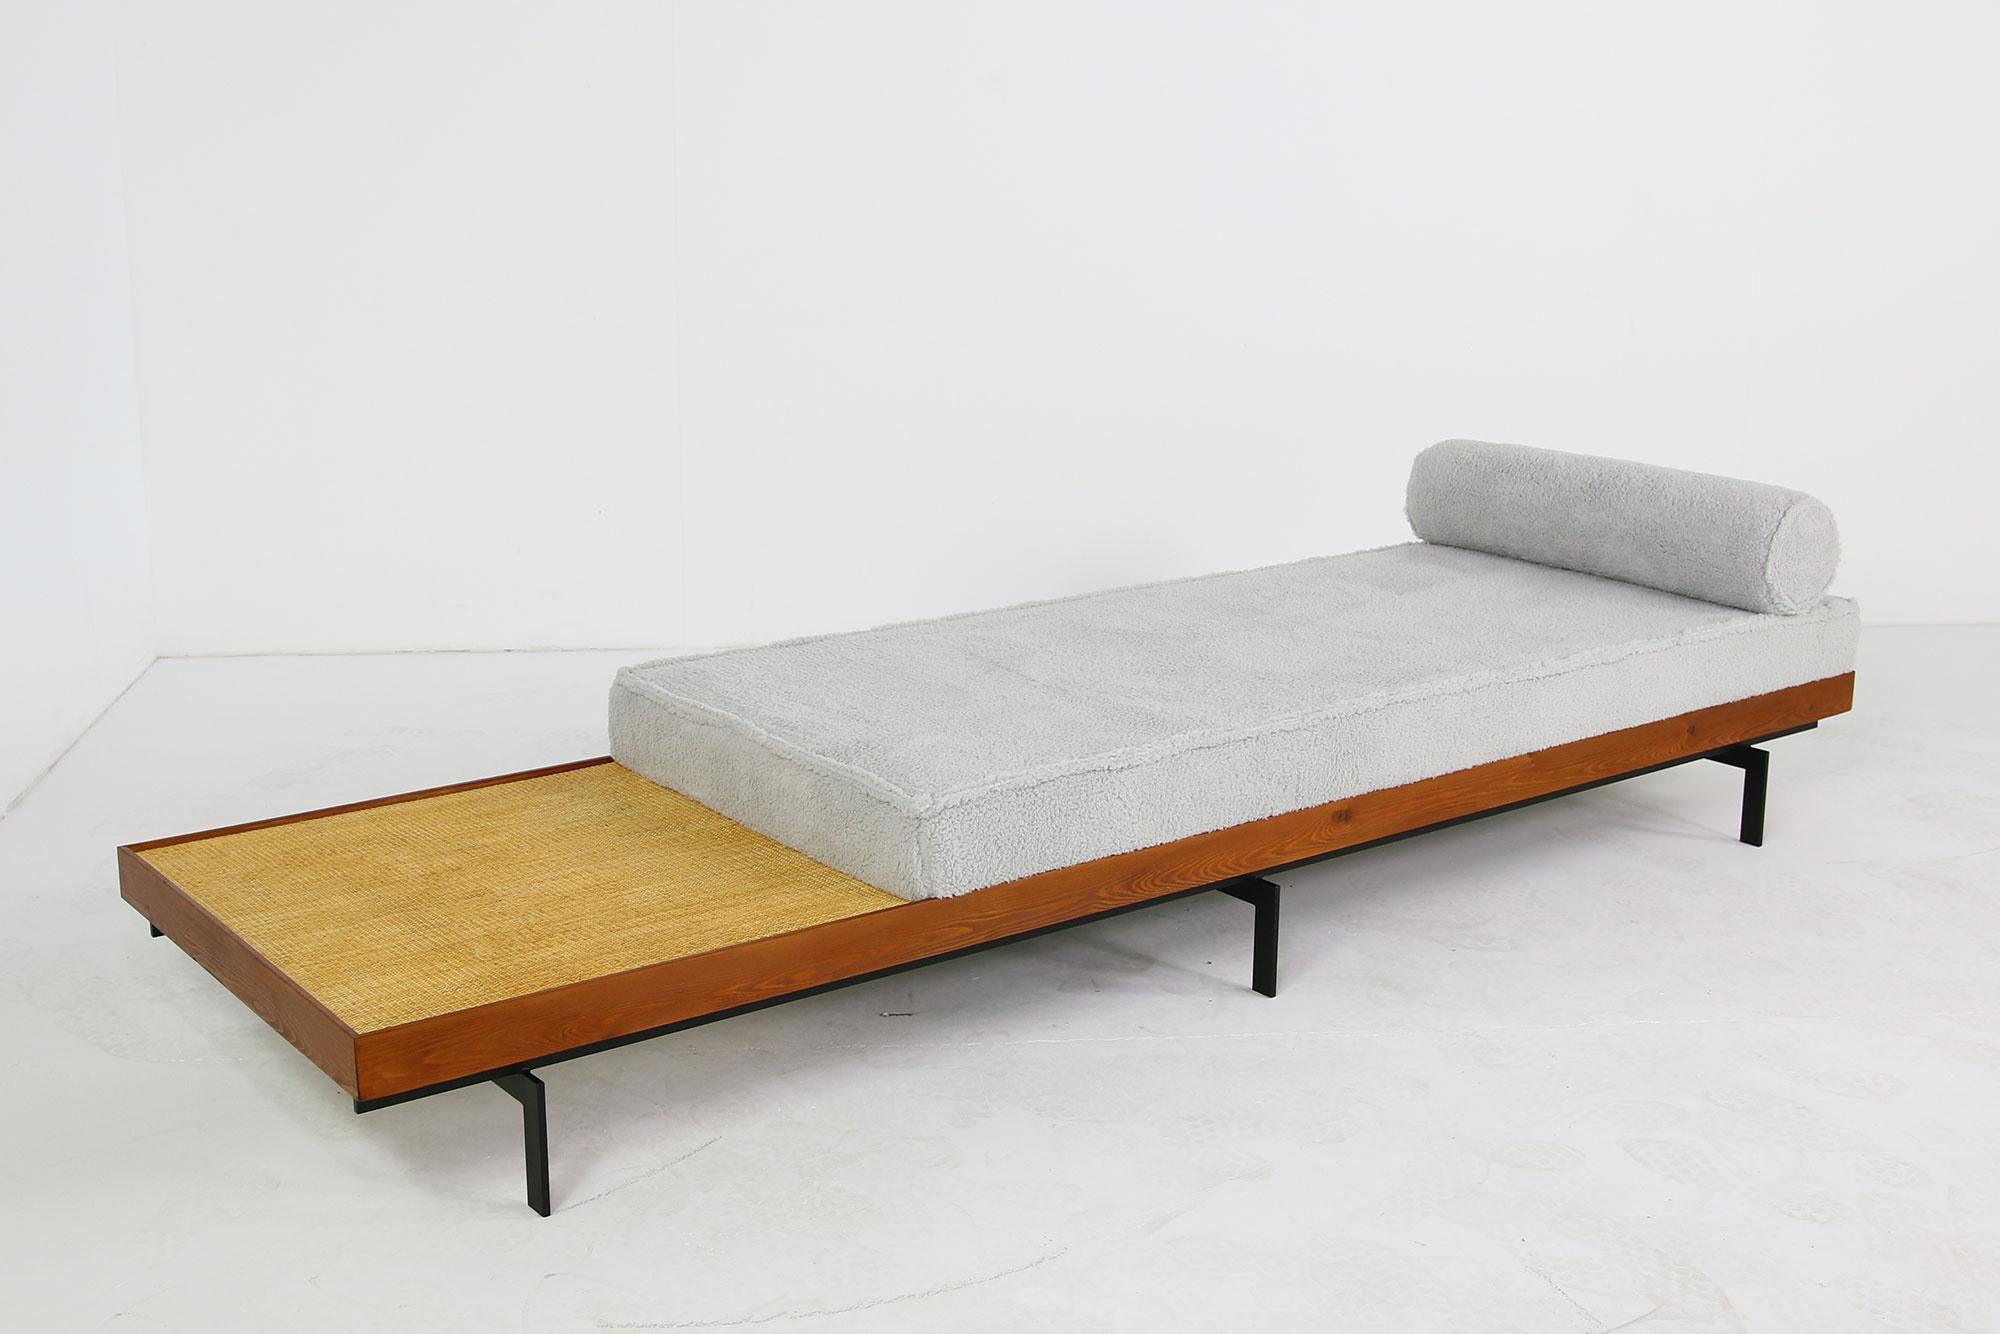 Contemporary Nathan Lindberg Long Daybed Mod NL 31L Sofa, Siberian Larch Wood, Steel and Cane